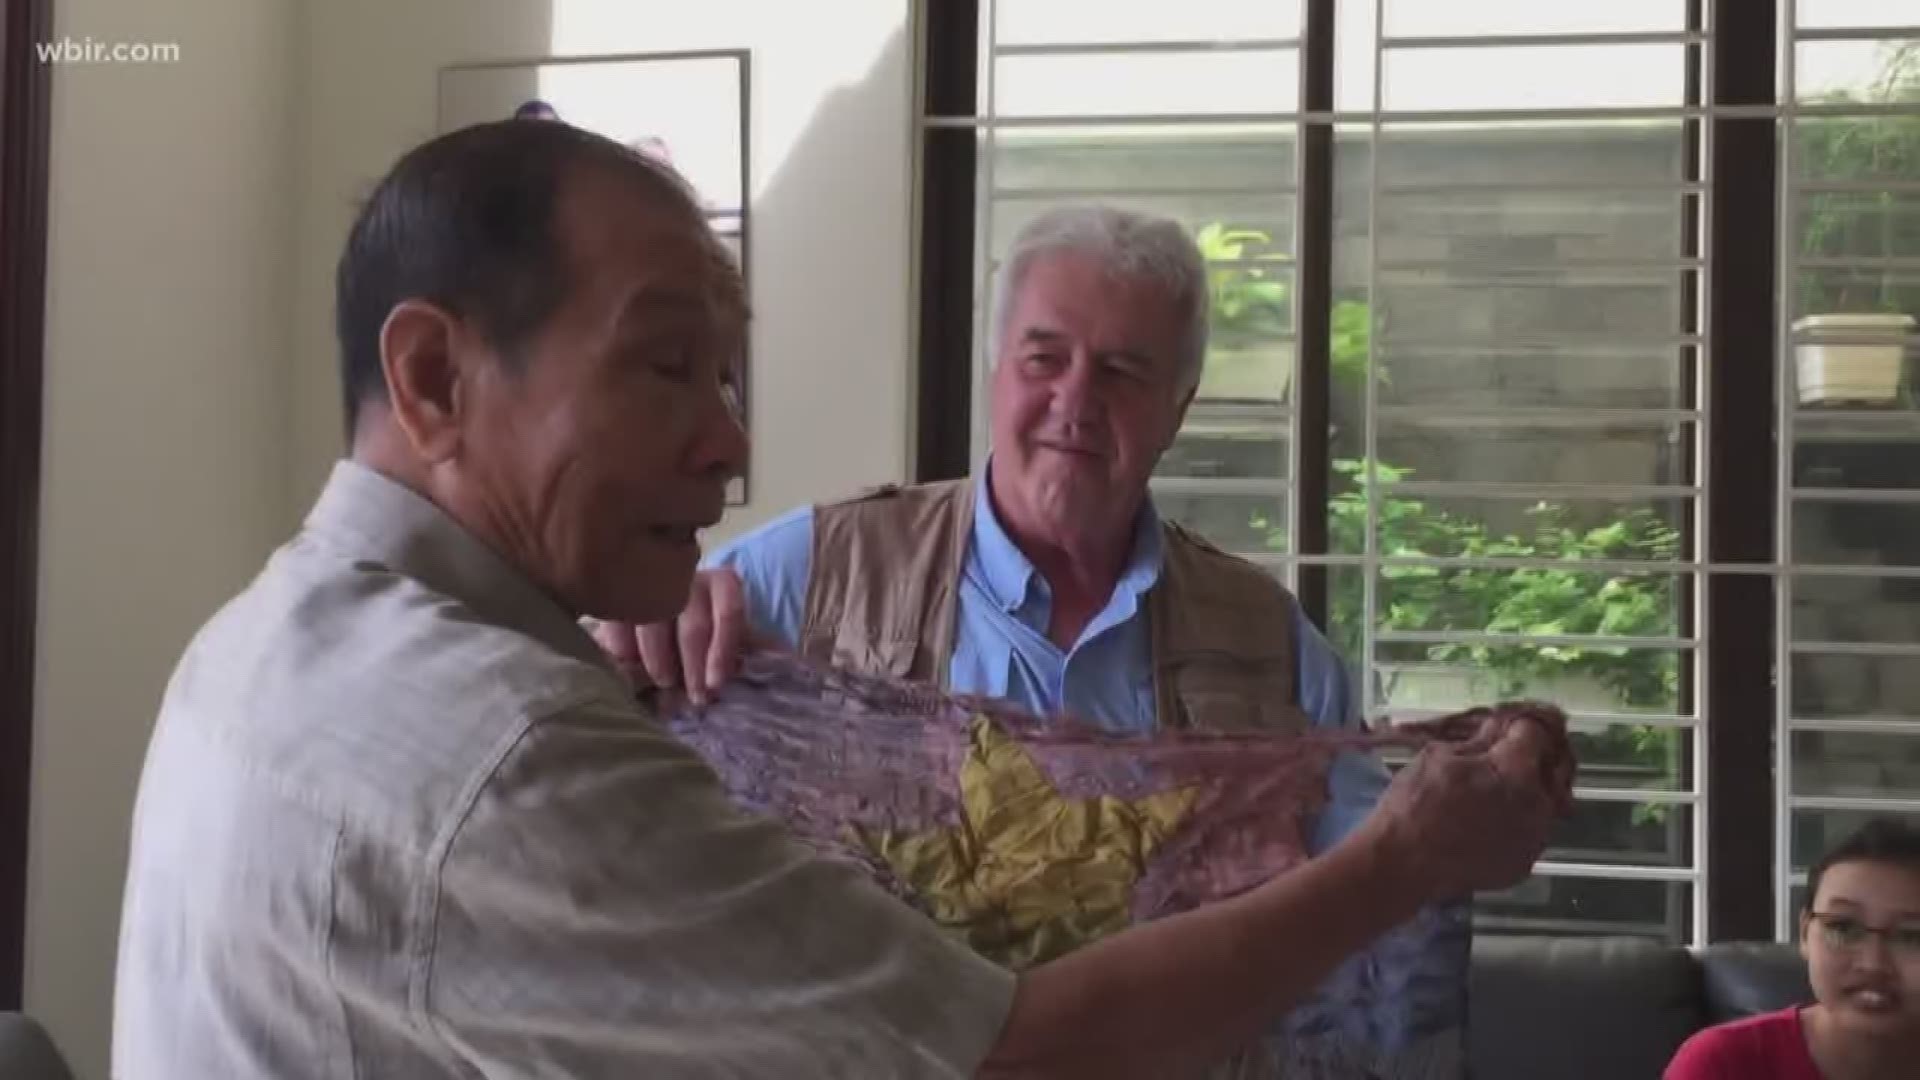 A year ago, a group of Vietnam veterans returned to that country for the first time since the war. Now, they are reflecting on that trip and how it changed them.